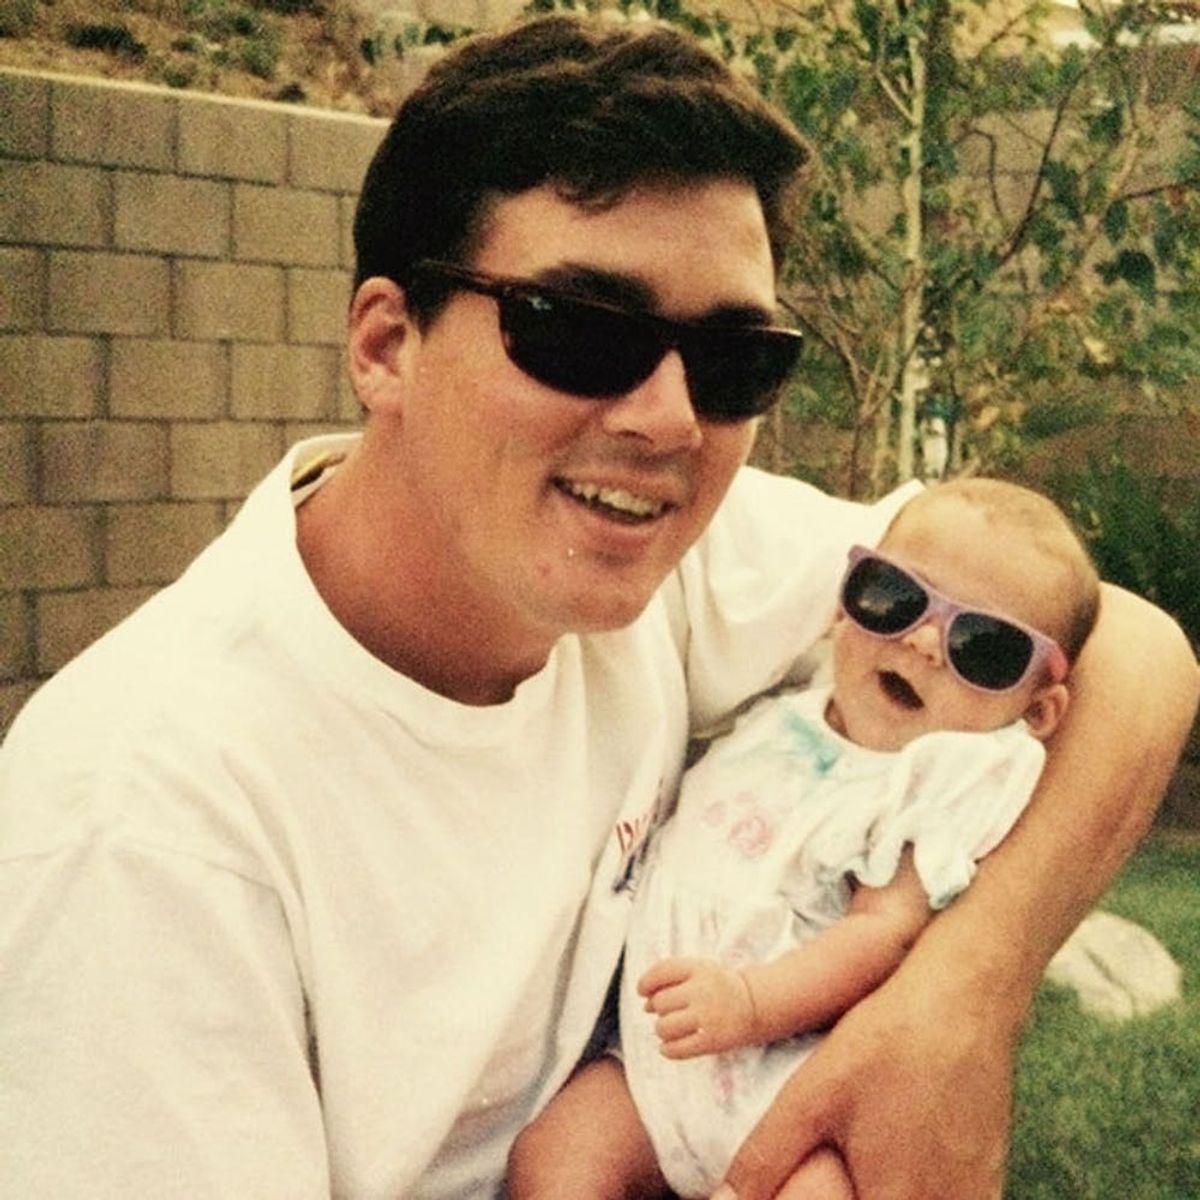 18 Photos That Prove Dads Are Still the Original Hipsters